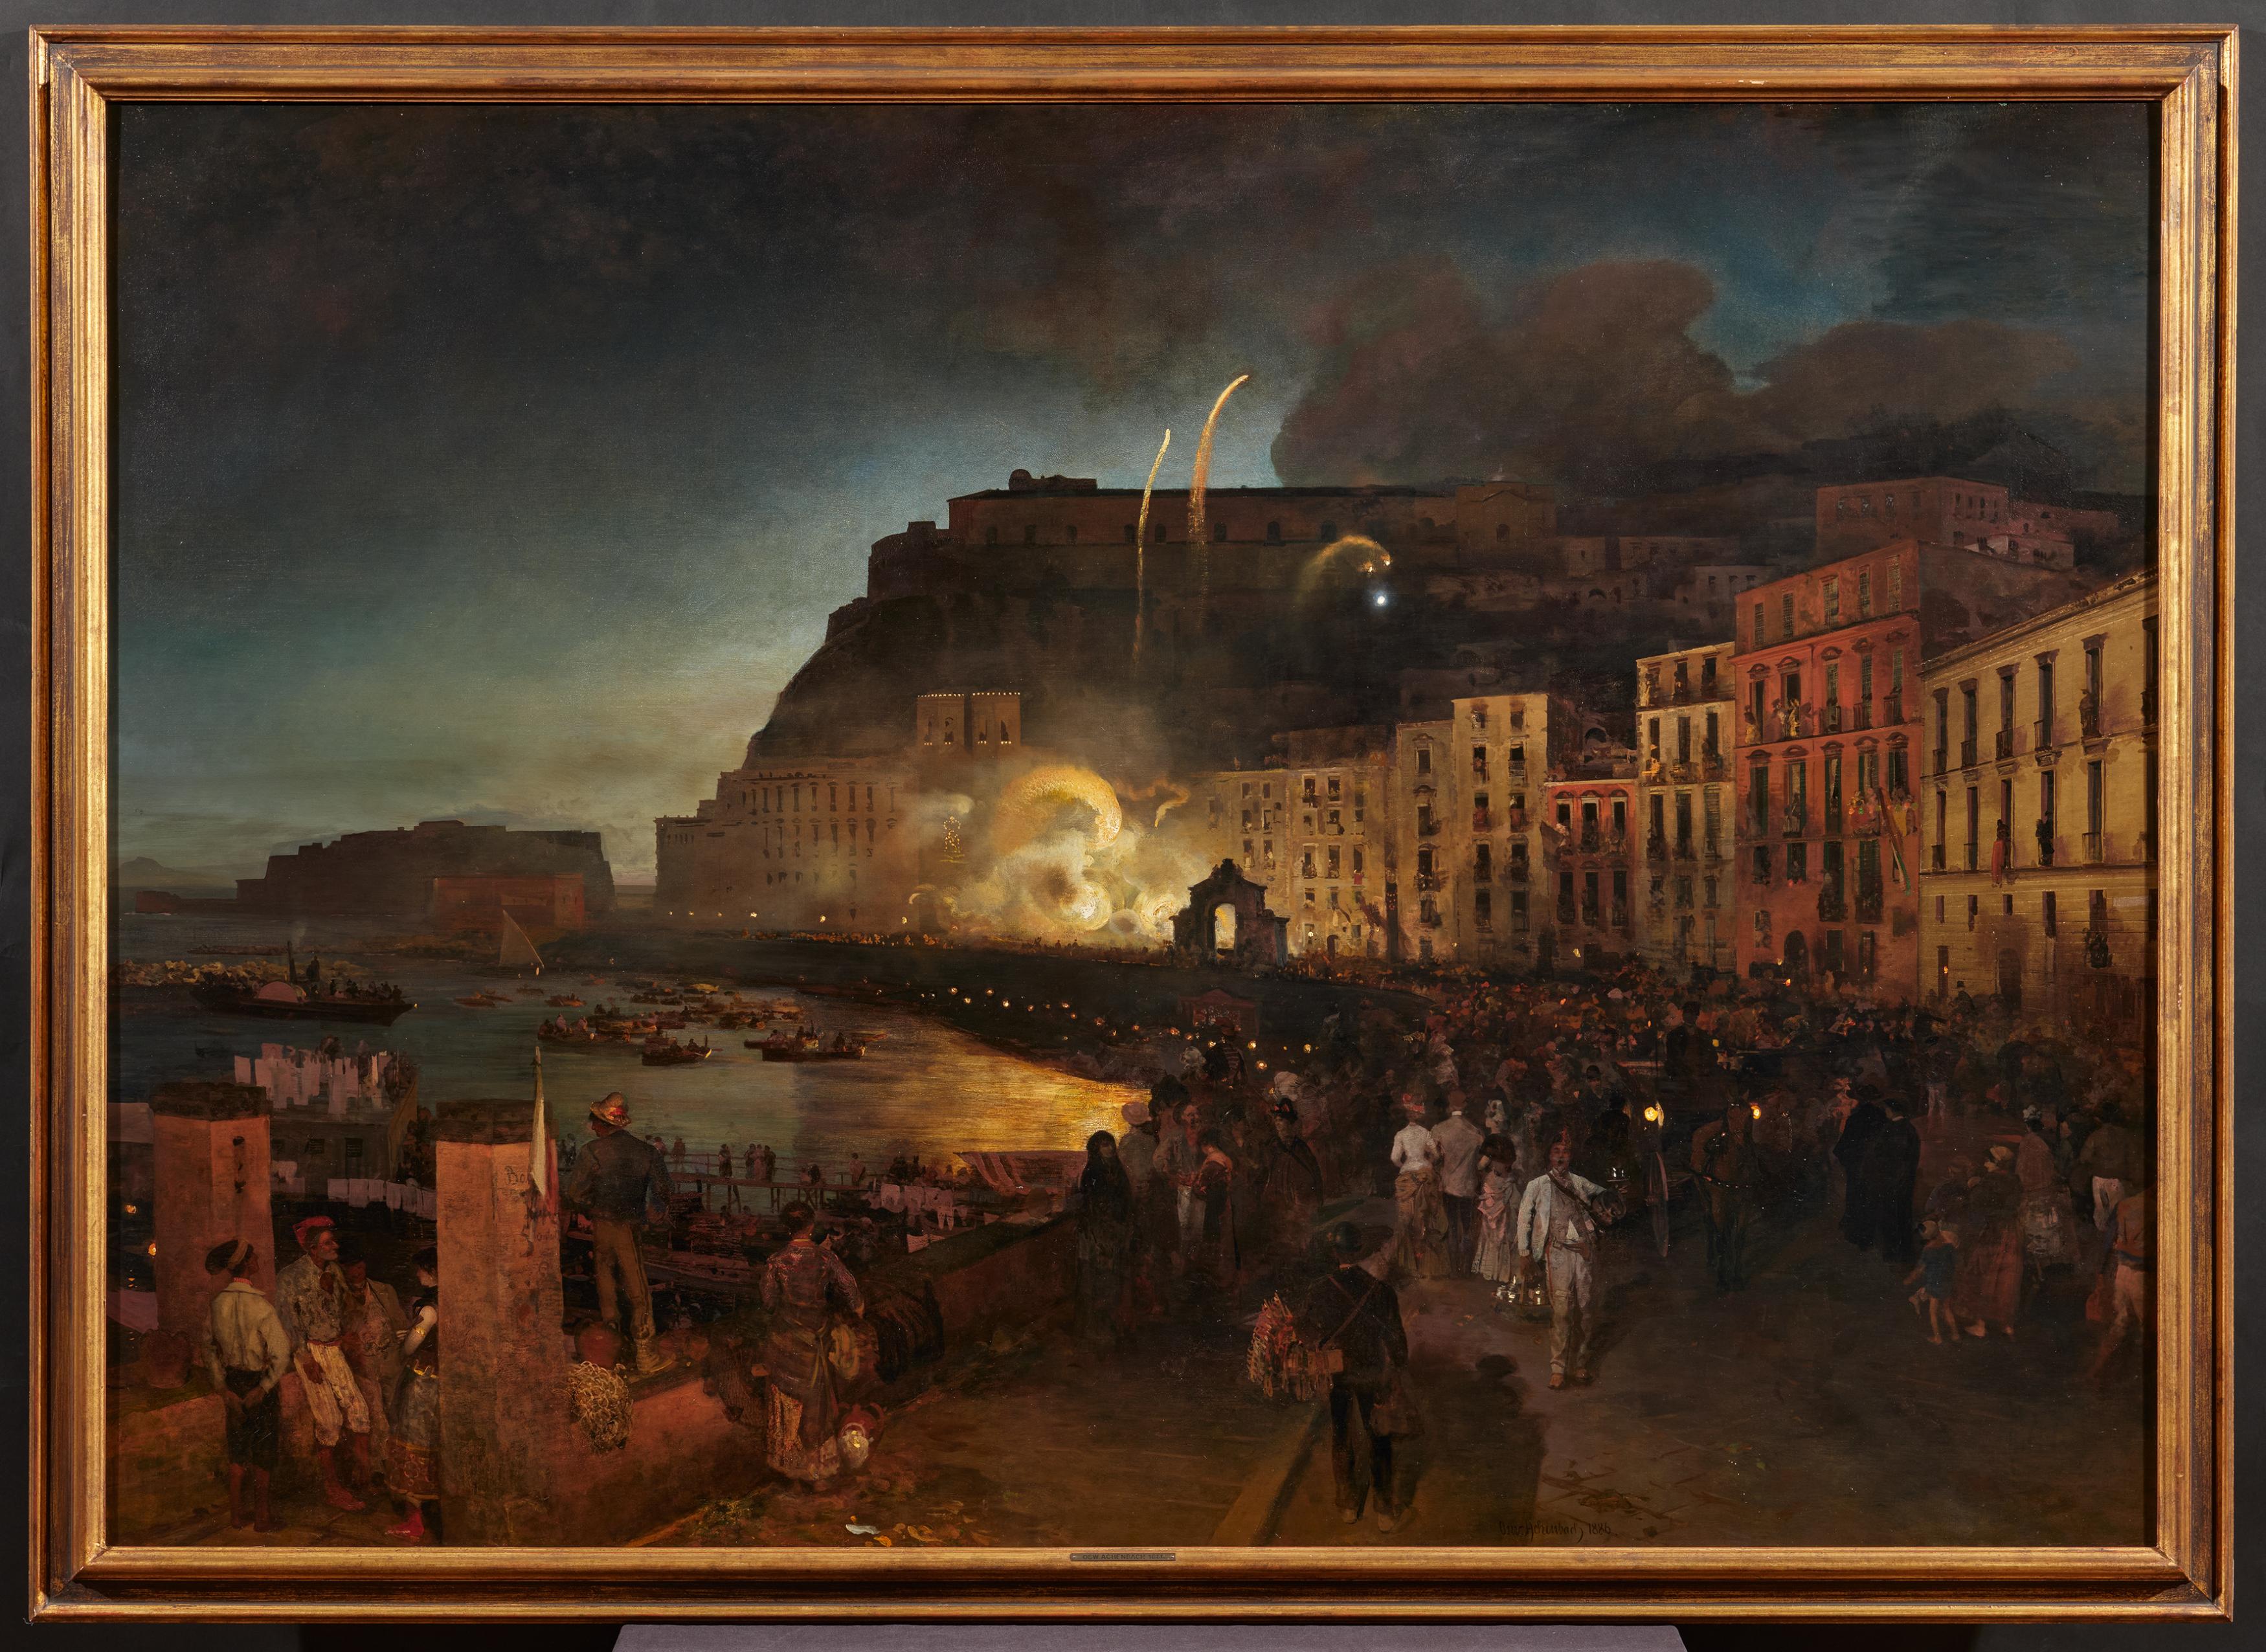 Oswald Achenbach: Feast of Santa Lucia in Naples - Image 2 of 4